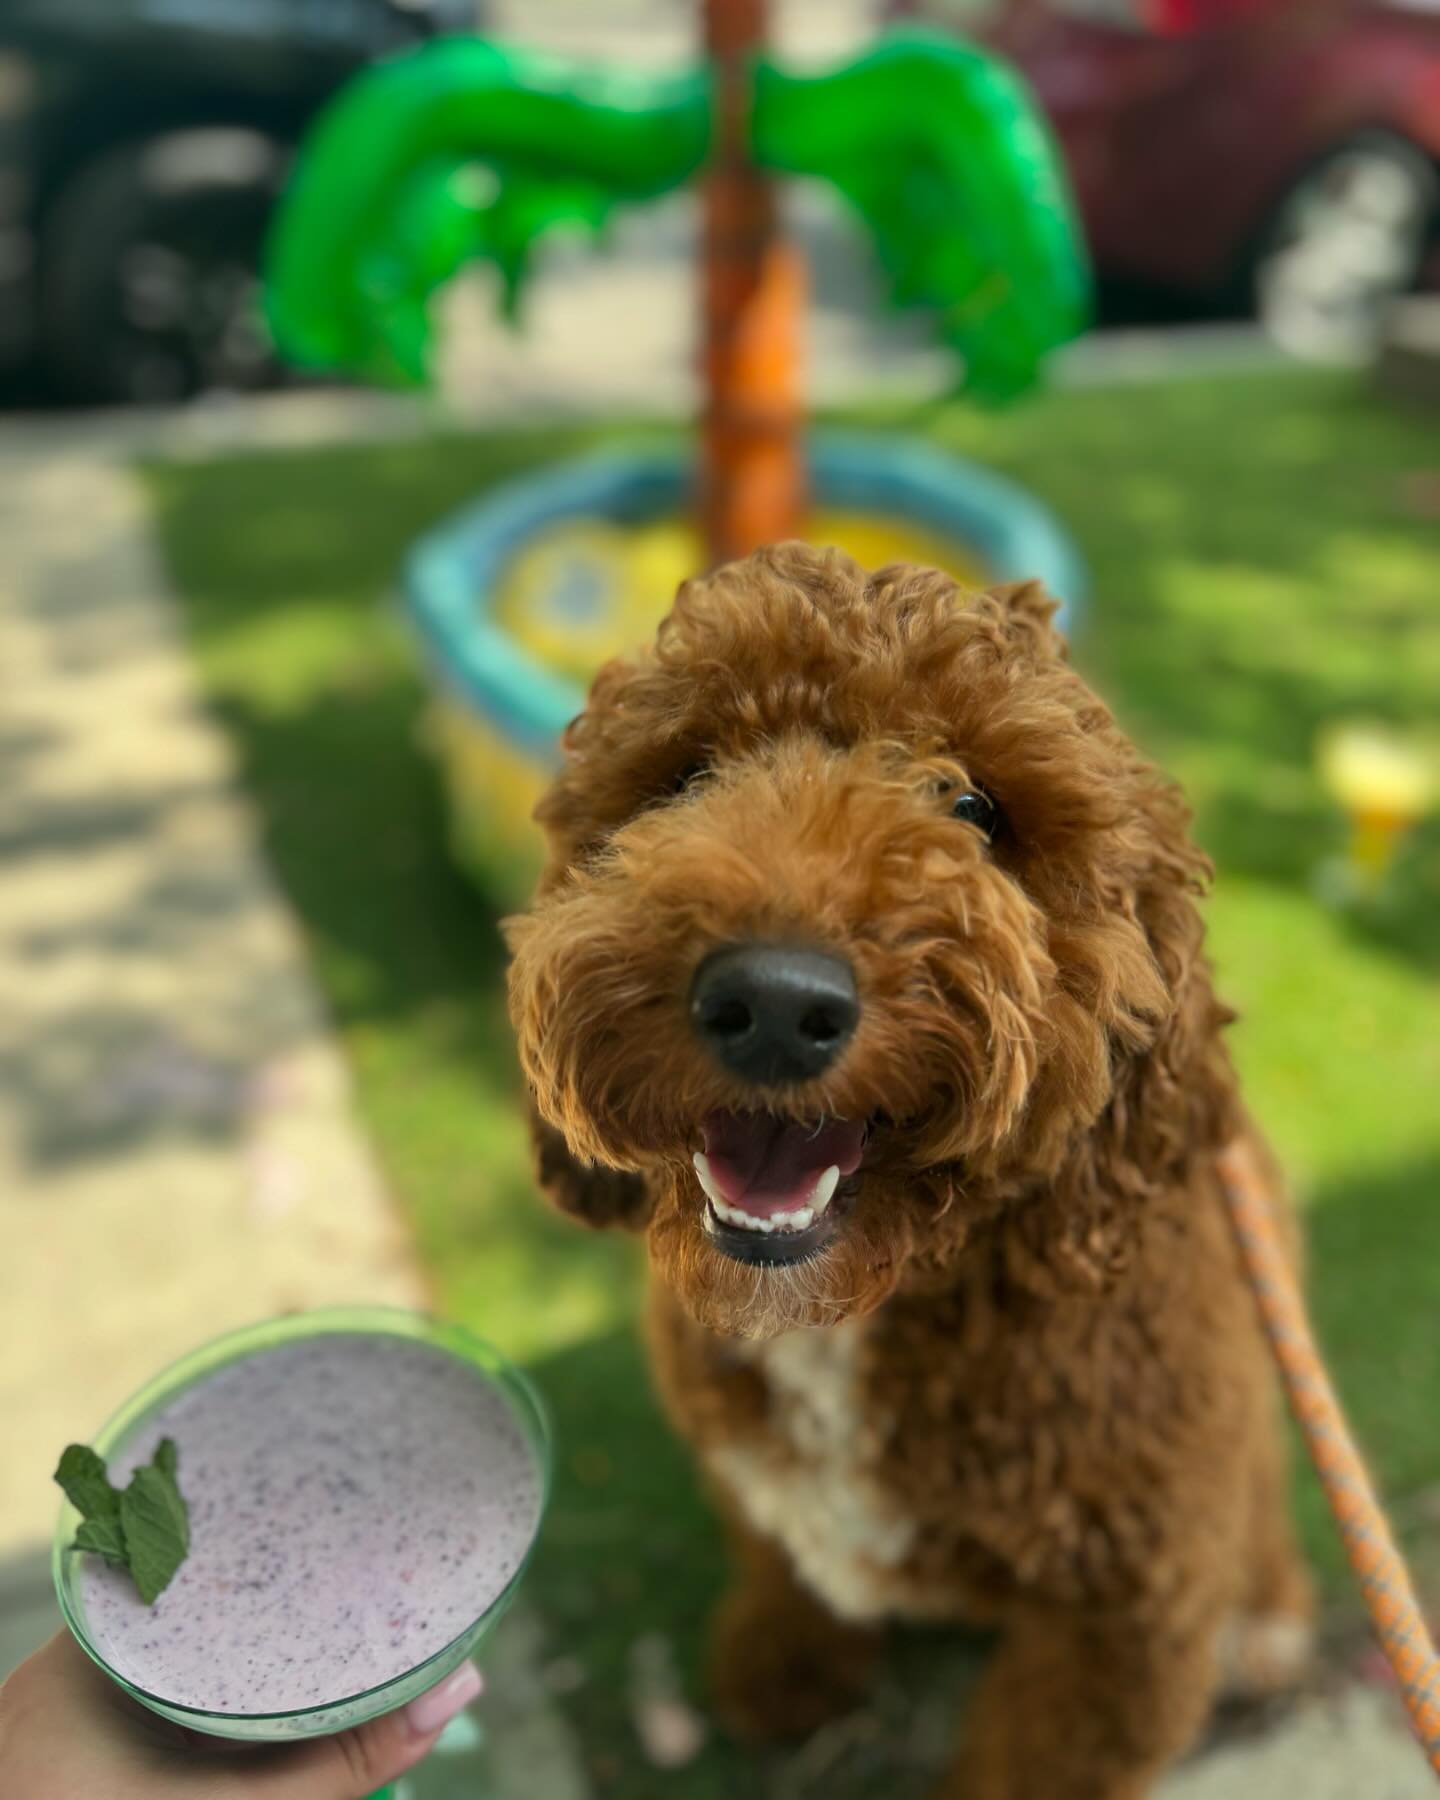 Please enjoy Part 1 of our very first Yappy Hour event 🍹The Puptini was a pack favorite 🍸🩷 What a pawesome start to the summertime☀️🐾

🐶

#dogsofchicago #dogparty #pawtytime #hfpc #doggydaycare #doglove #cutedogs #puppies #cute